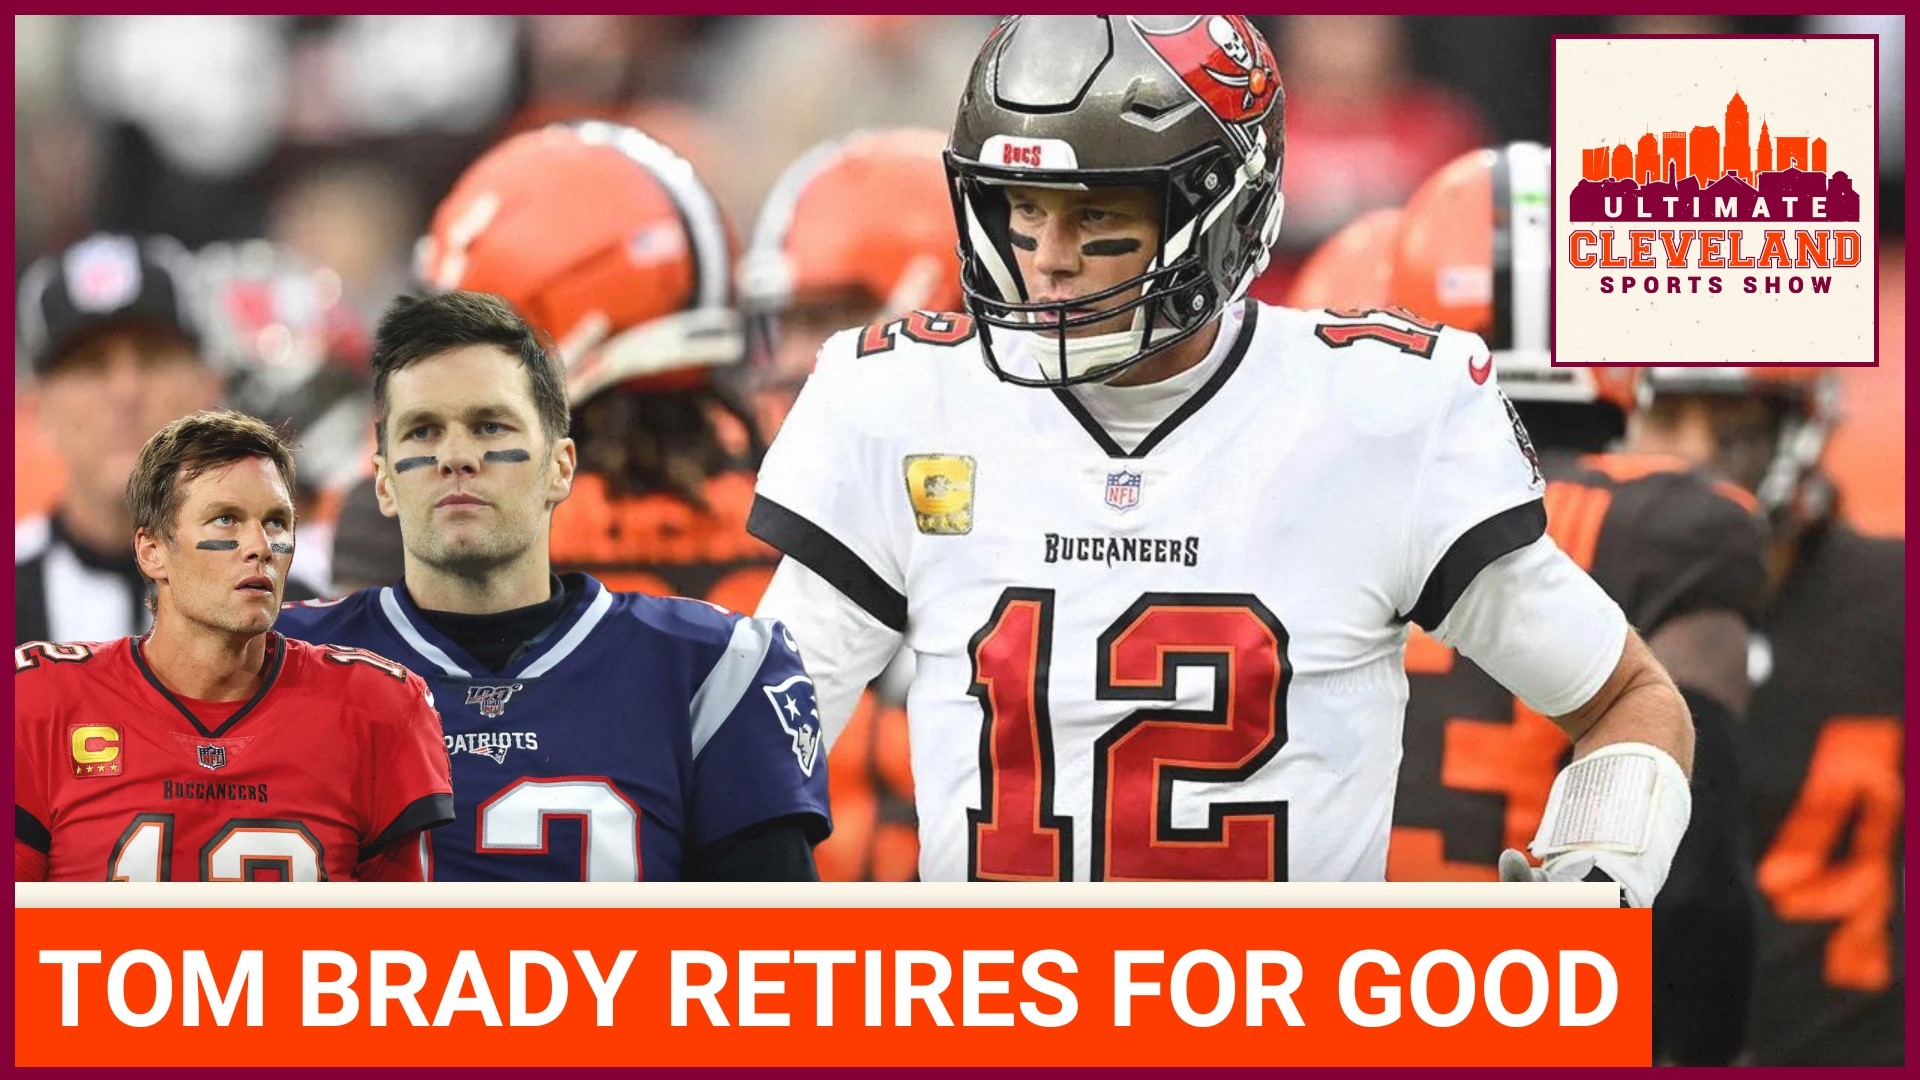 Tom Brady announces his retirement from the NFL